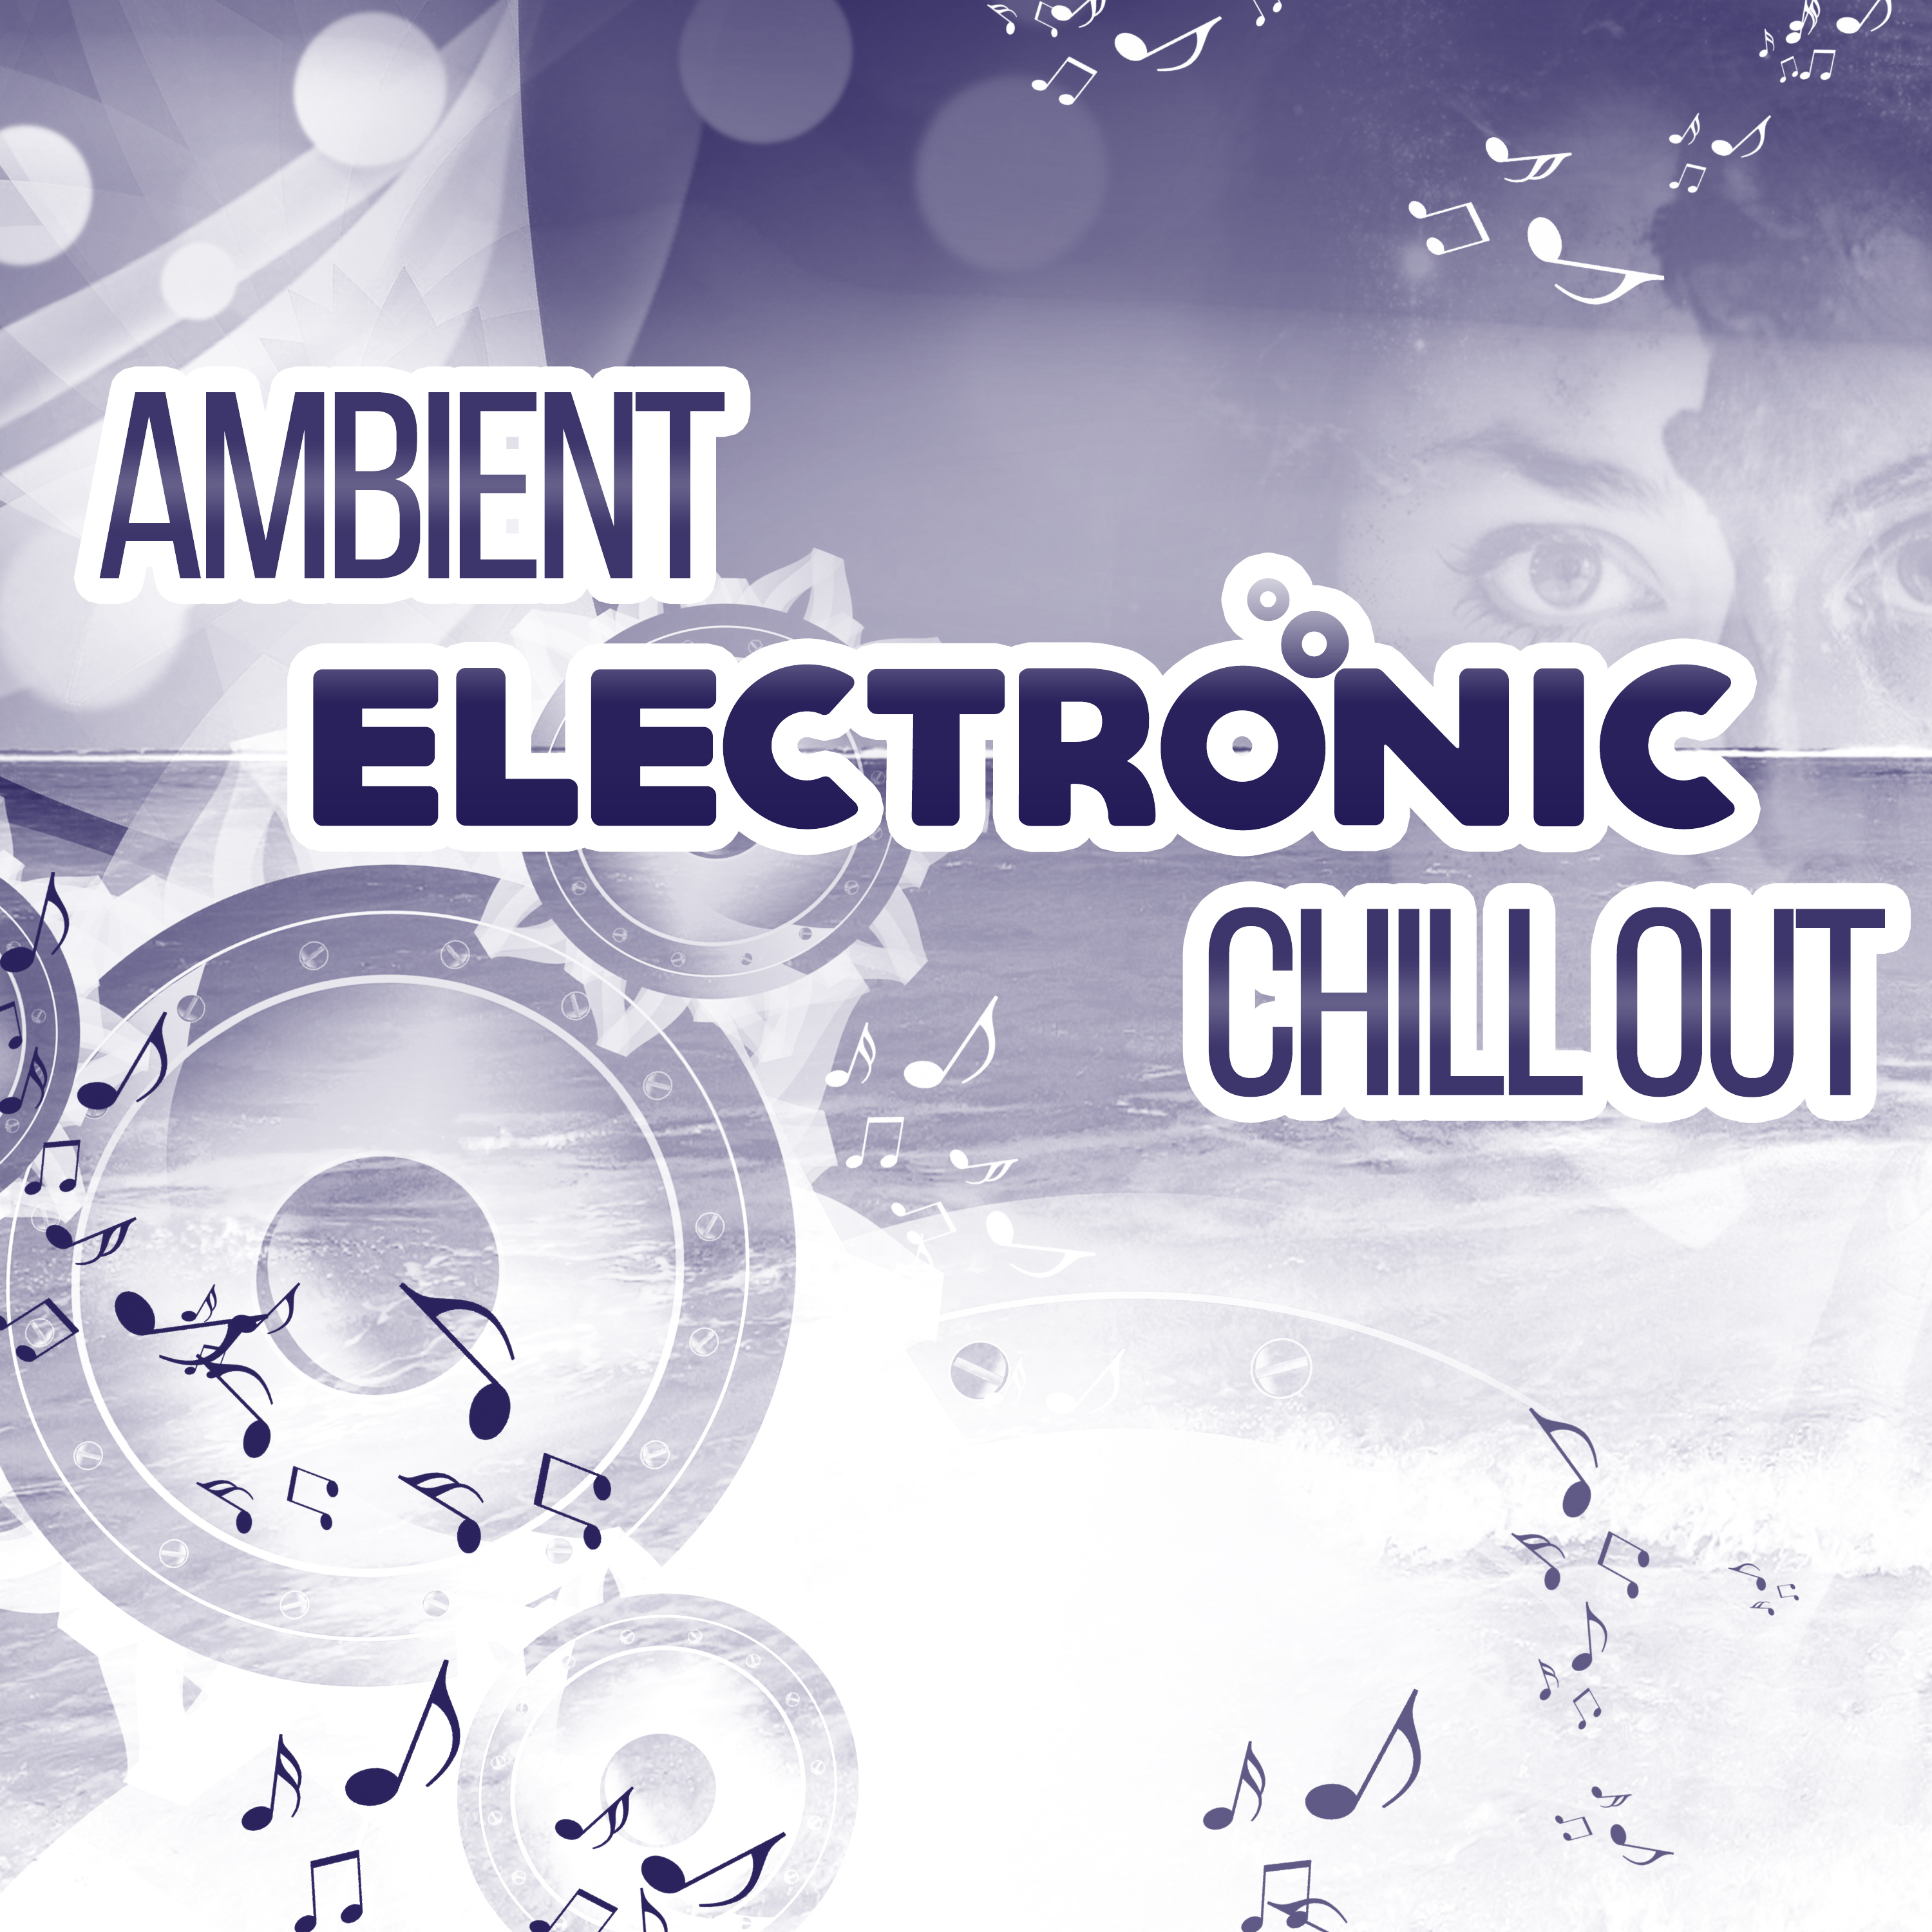 Ambient Electronic Chill Out – Happy Chillout Music, Electronic Music, Top Chill Out Hits